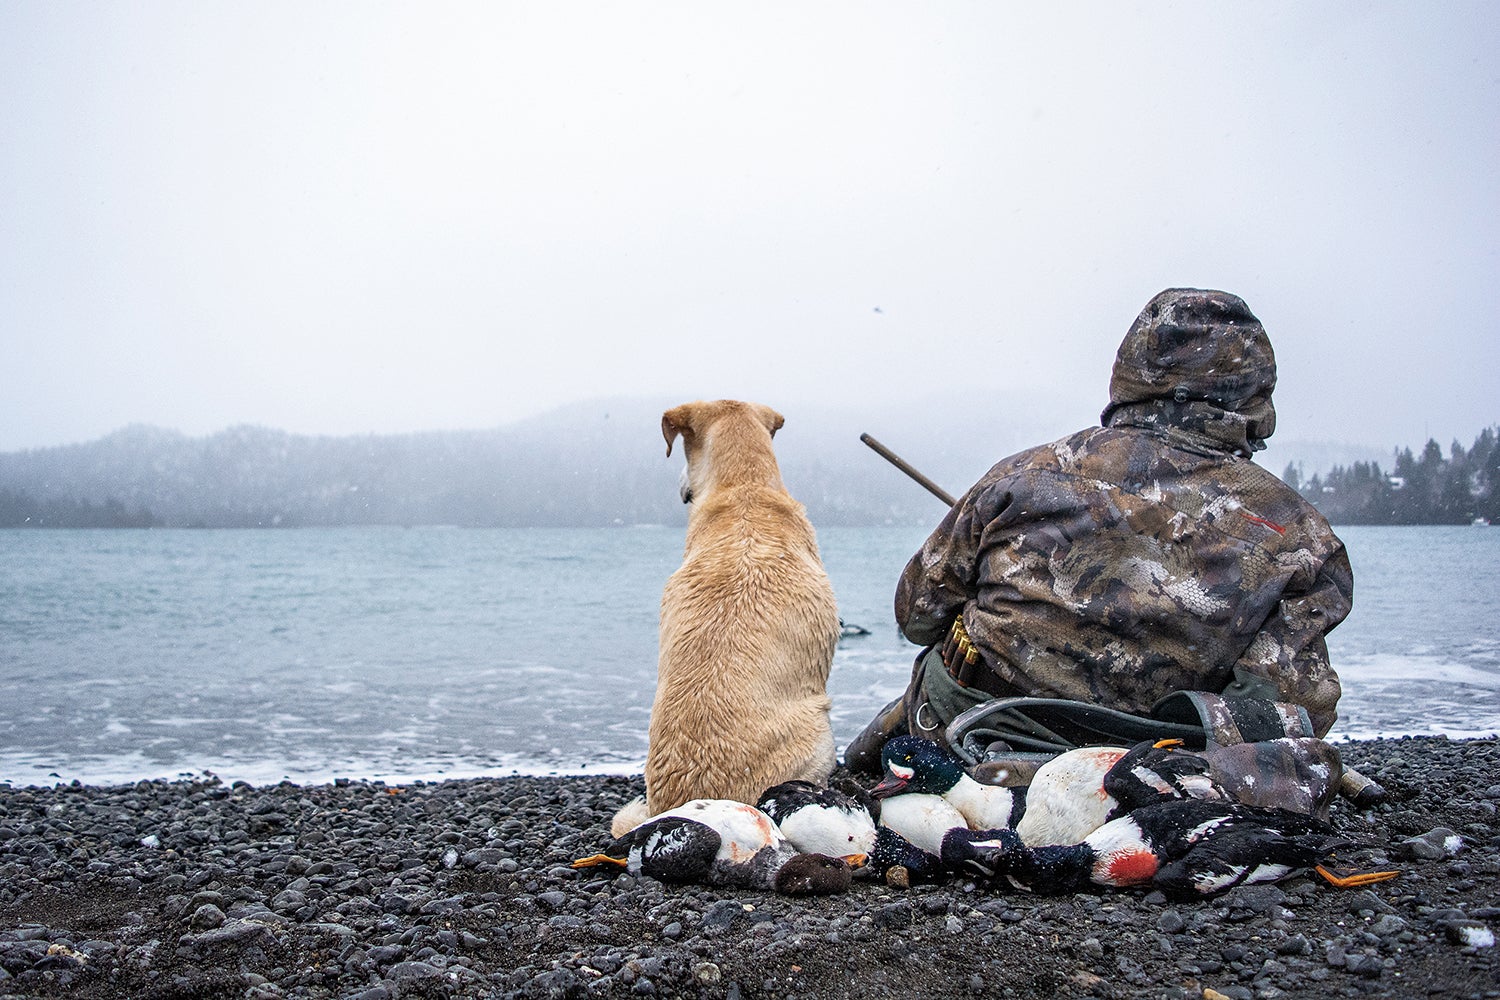 duck hunter and yellow lab sit on rocky lakeshore in light snowfall with ducks